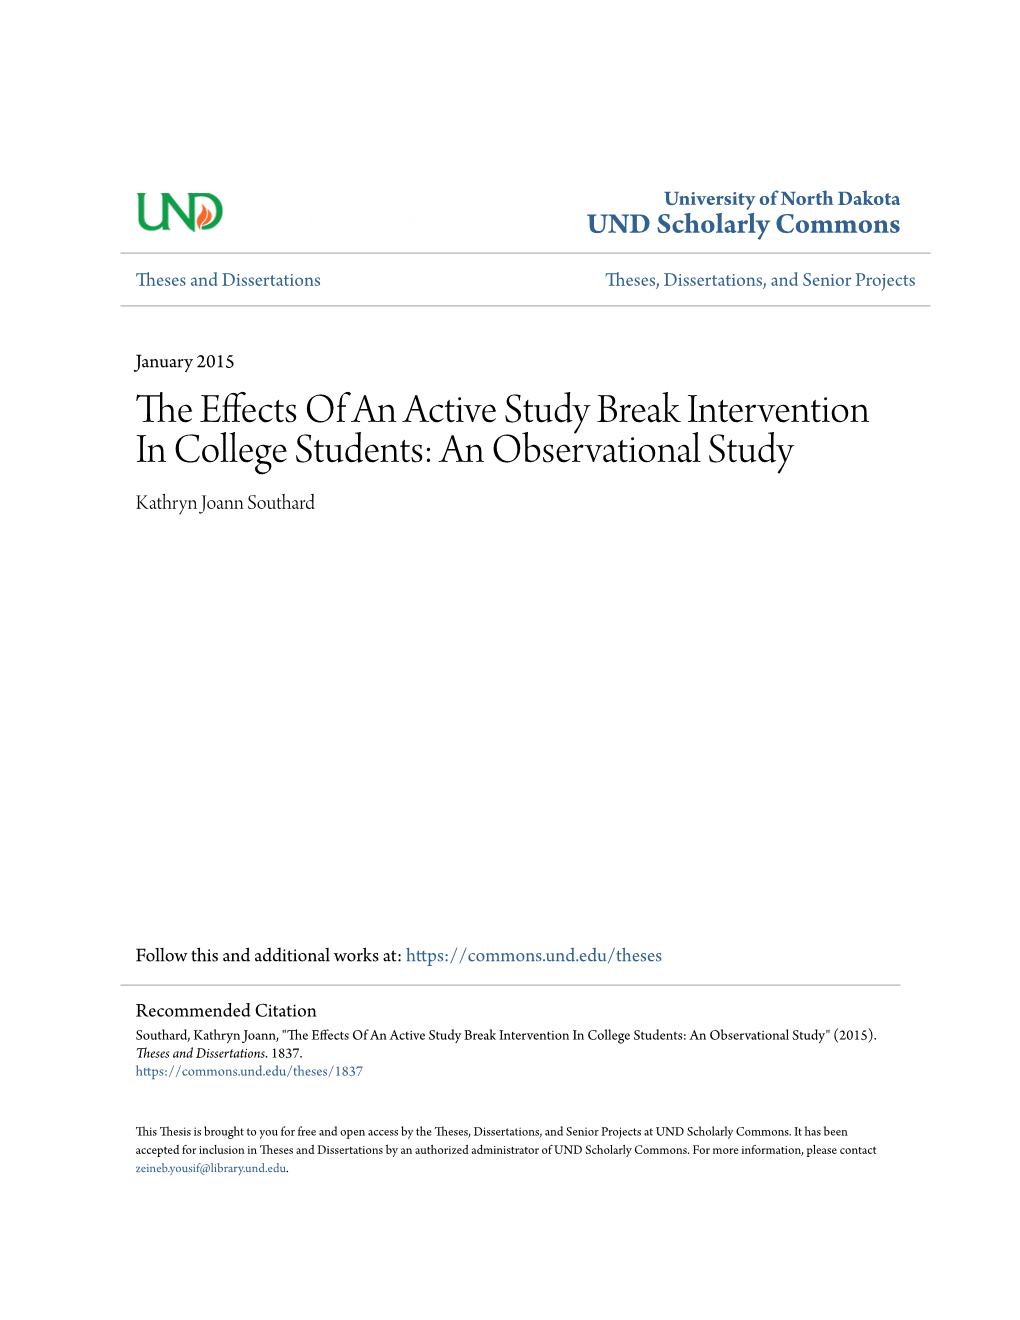 The Effects of an Active Study Break Intervention in College Students: an Observational Study" (2015)